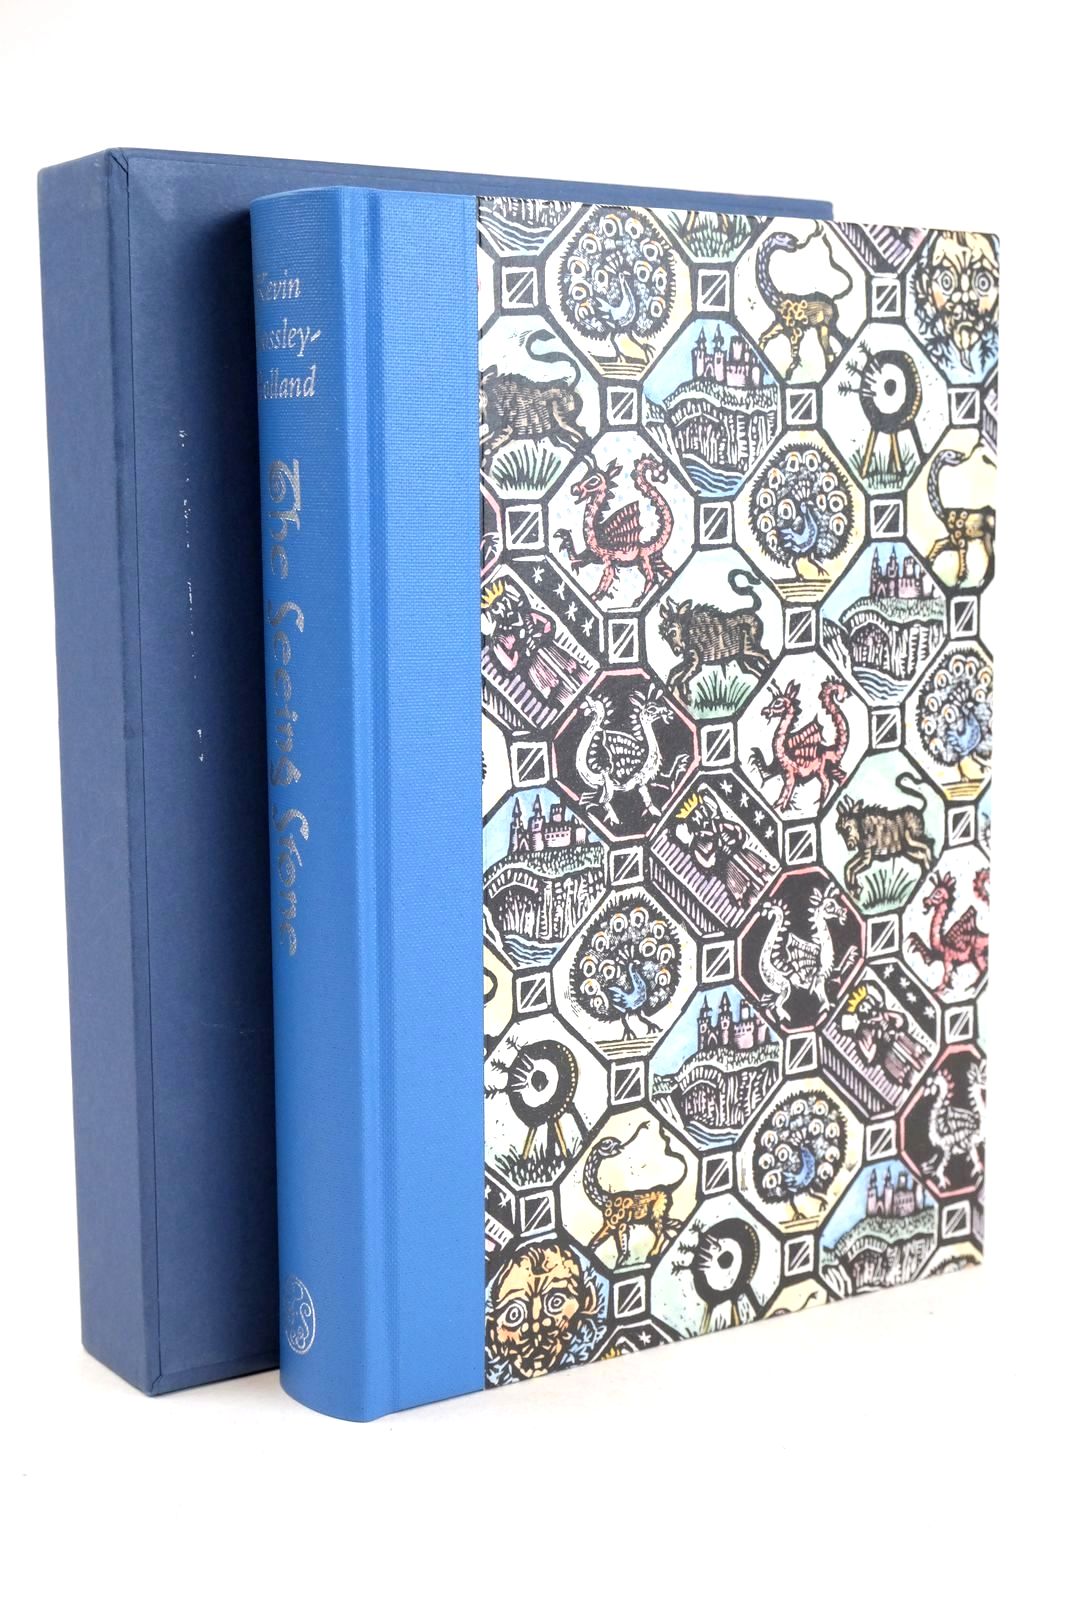 Photo of THE SEEING STONE written by Crossley-Holland, Kevin illustrated by Lawrence, John published by Folio Society (STOCK CODE: 1325953)  for sale by Stella & Rose's Books